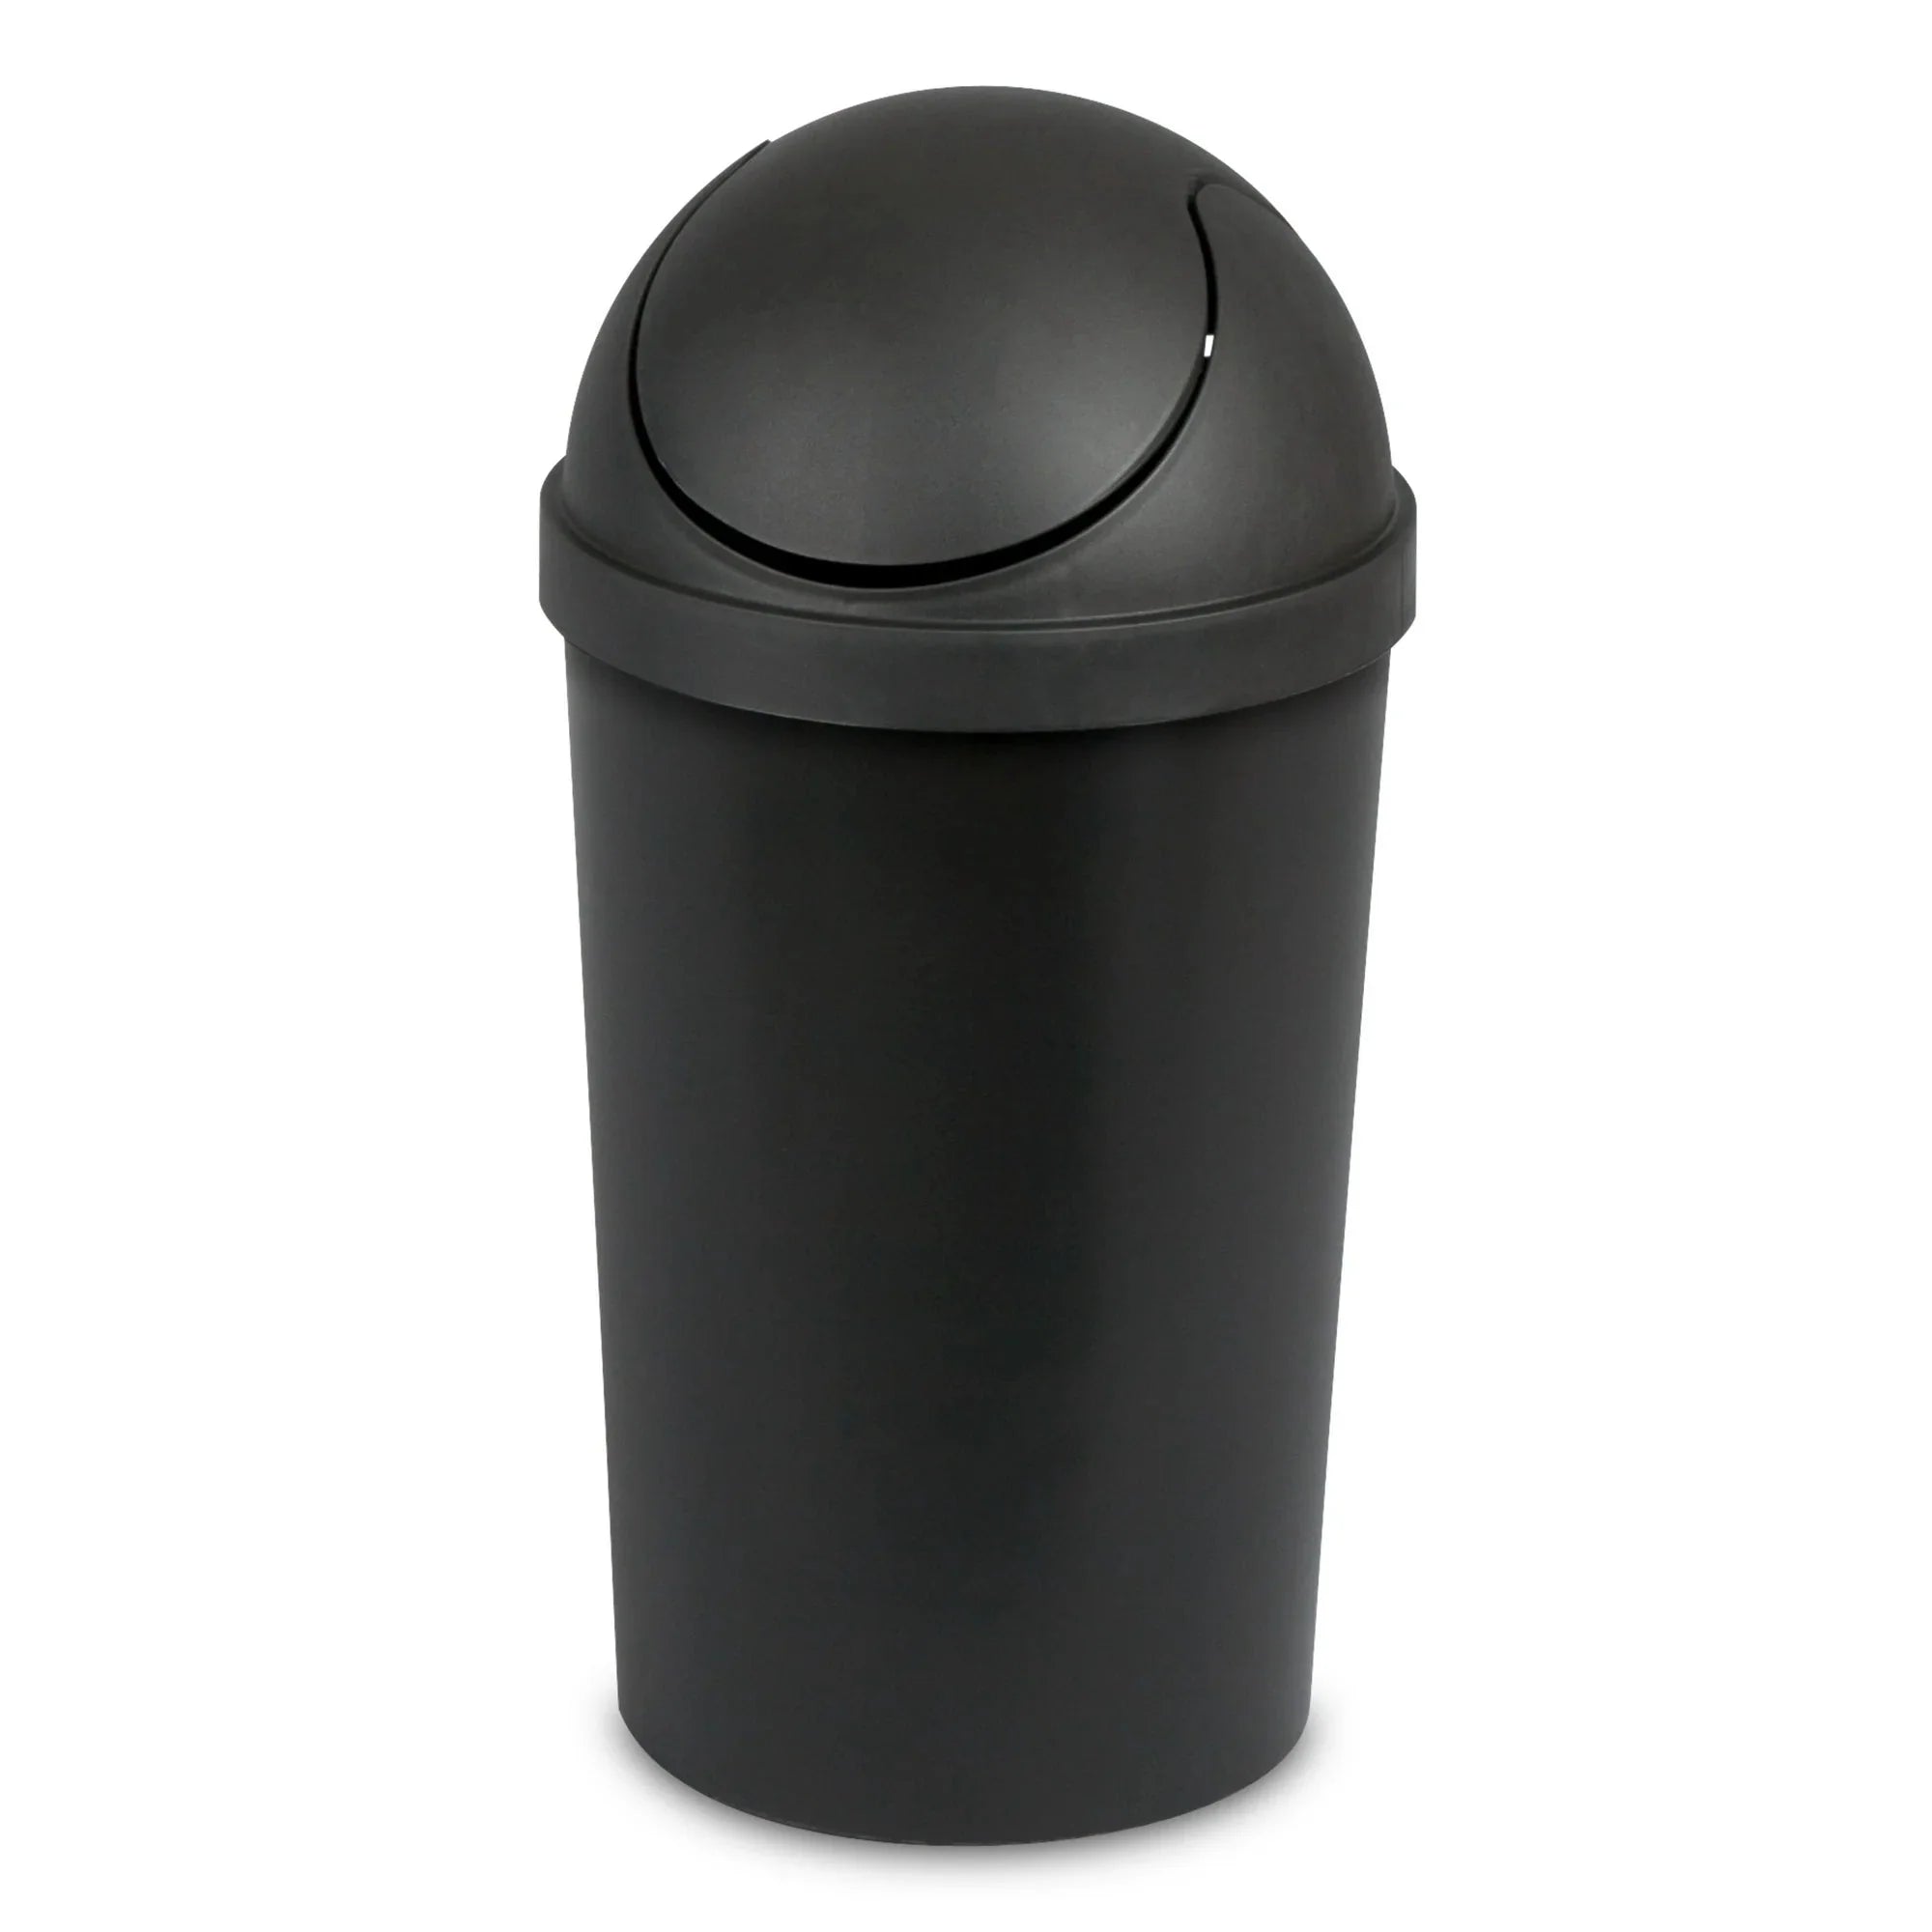 Wholesale prices with free shipping all over United States Sterilite 3 Gal. Round SwingTop Wastebasket Plastic, Black - Steven Deals